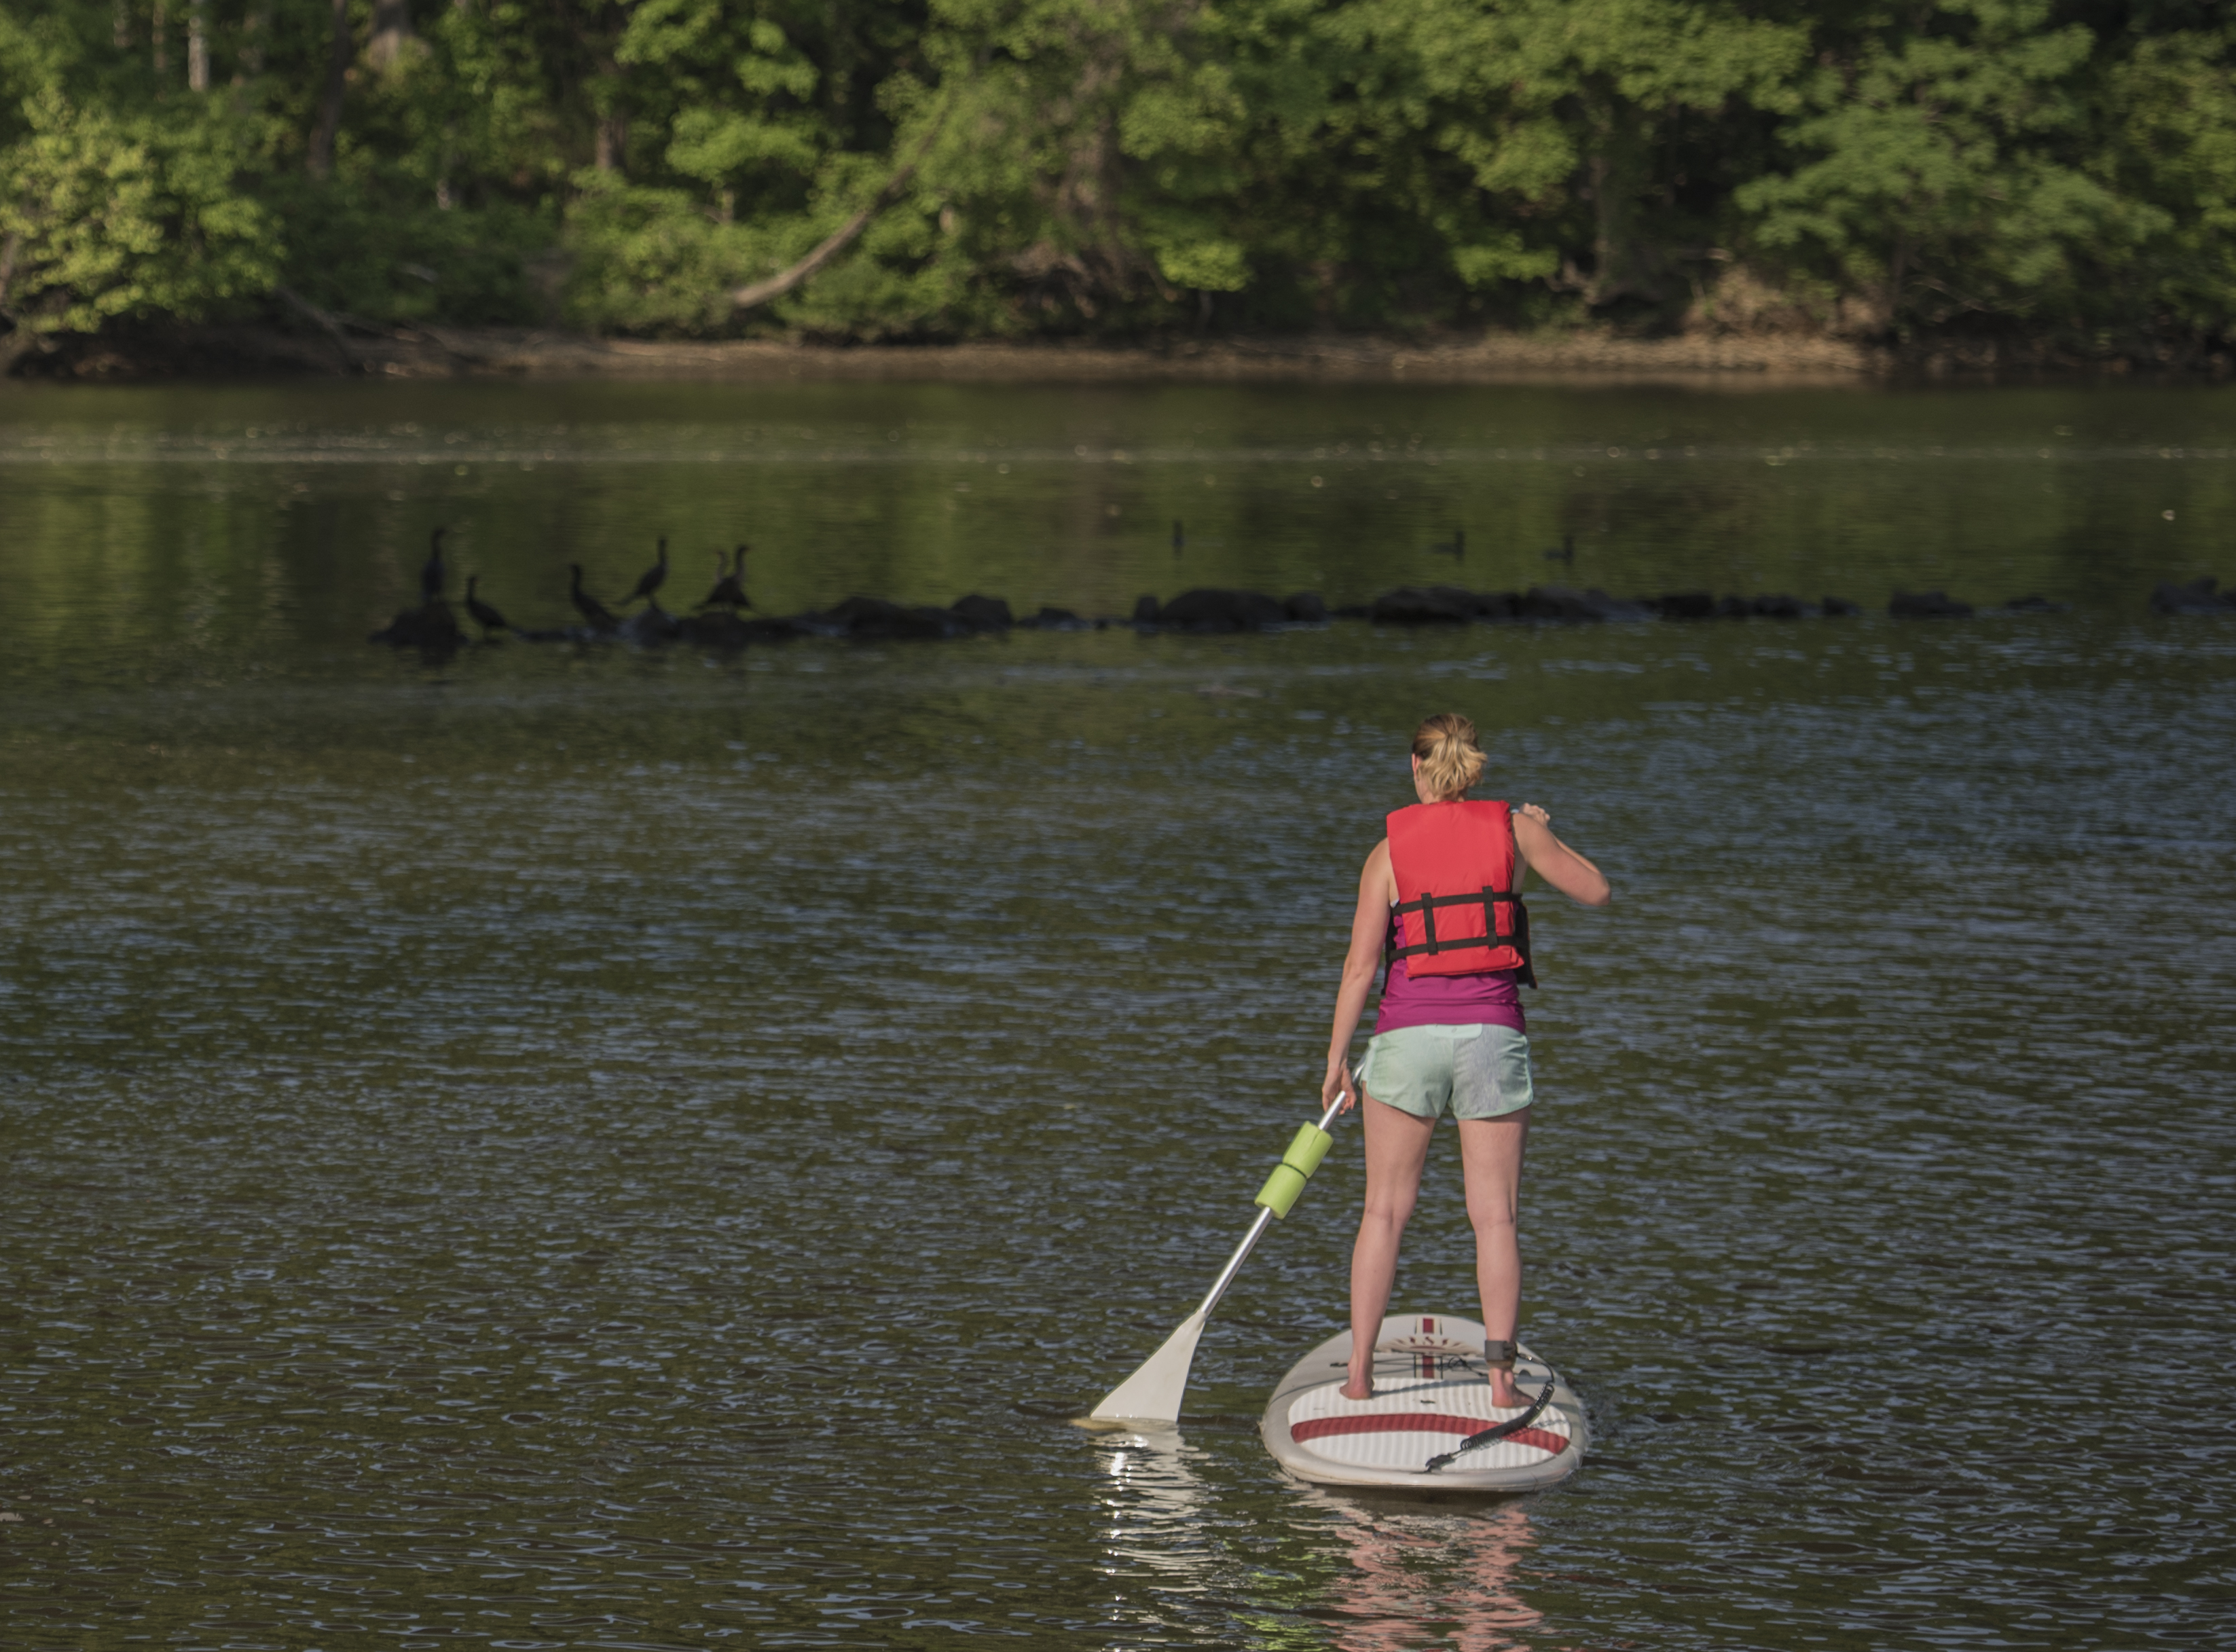 a woman in a red life jacket paddle-boarding on a body of water with birds on rocks and trees in the background